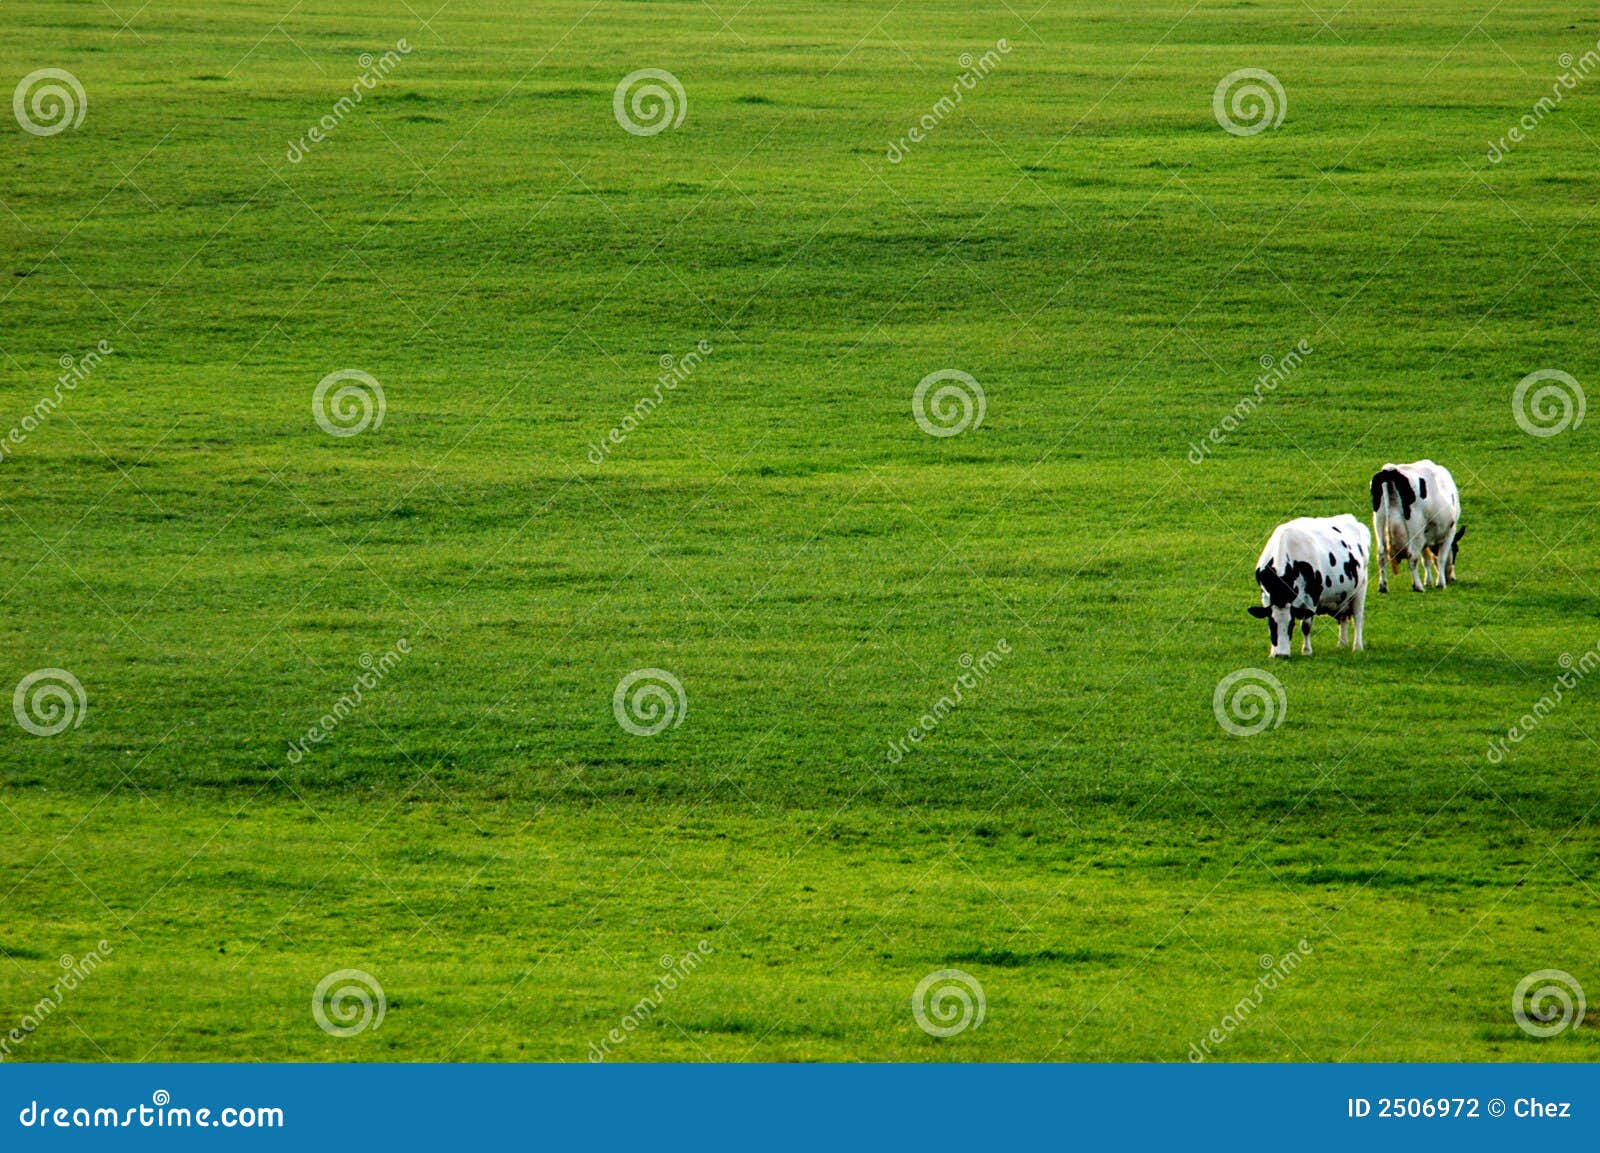 two cows in green pasture